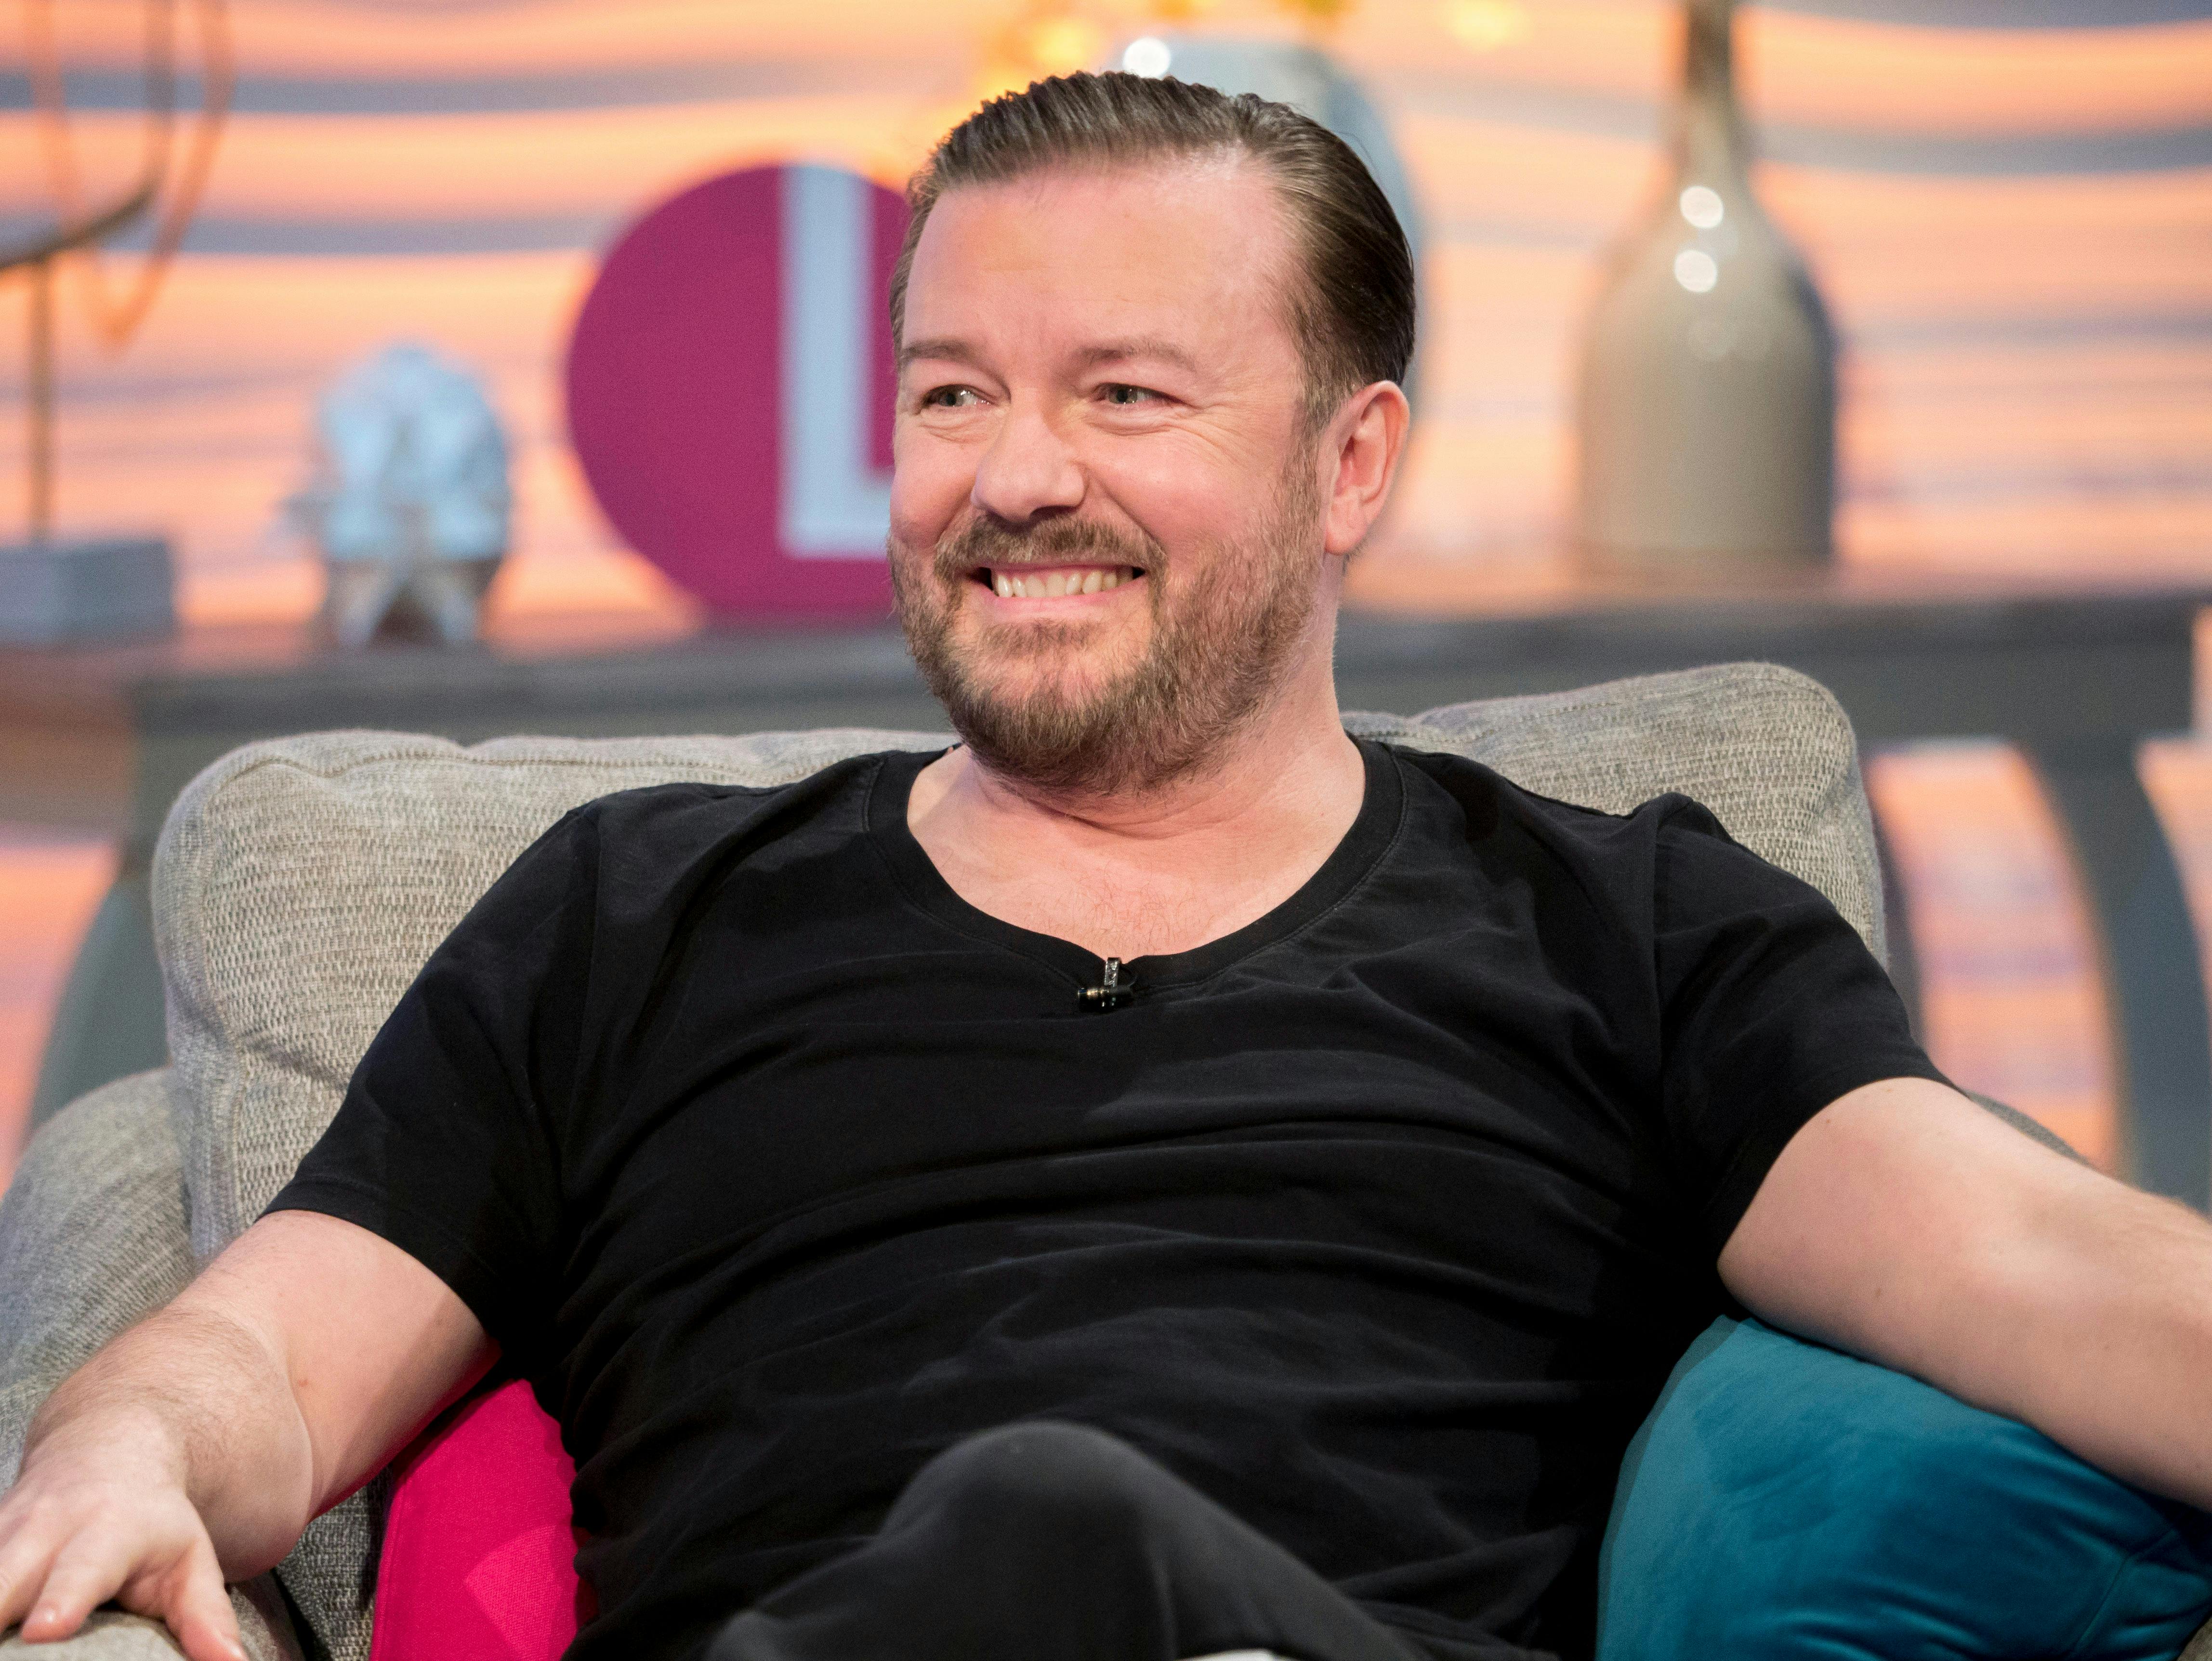 Ricky Gervais Lookalike - Hire David Brent Lookalike, C4, Doubles